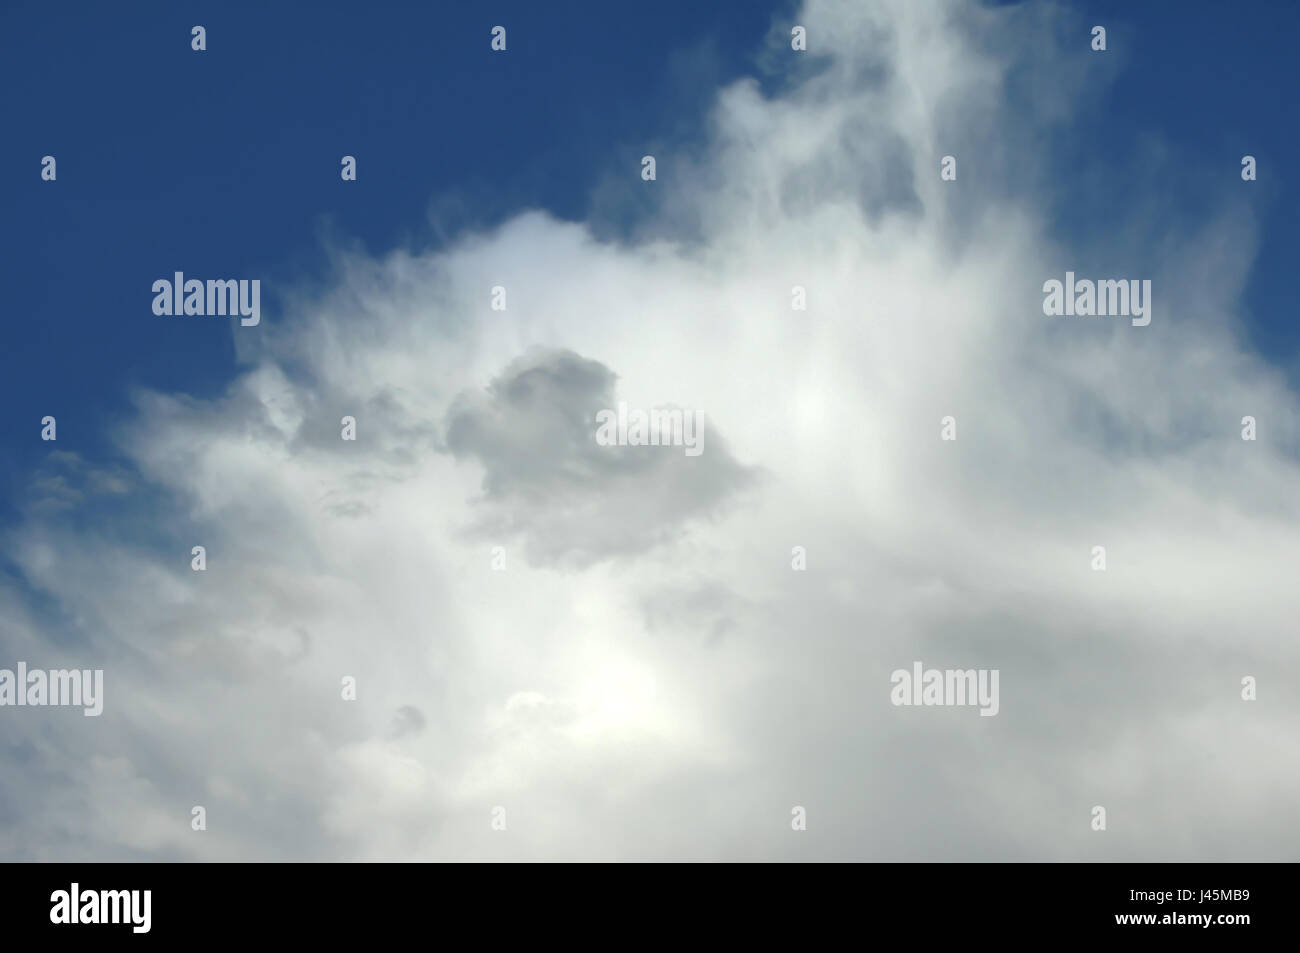 Air and sky is thin and whispy on this clear and sunny day.  Clouds fill two thirds of image. Stock Photo